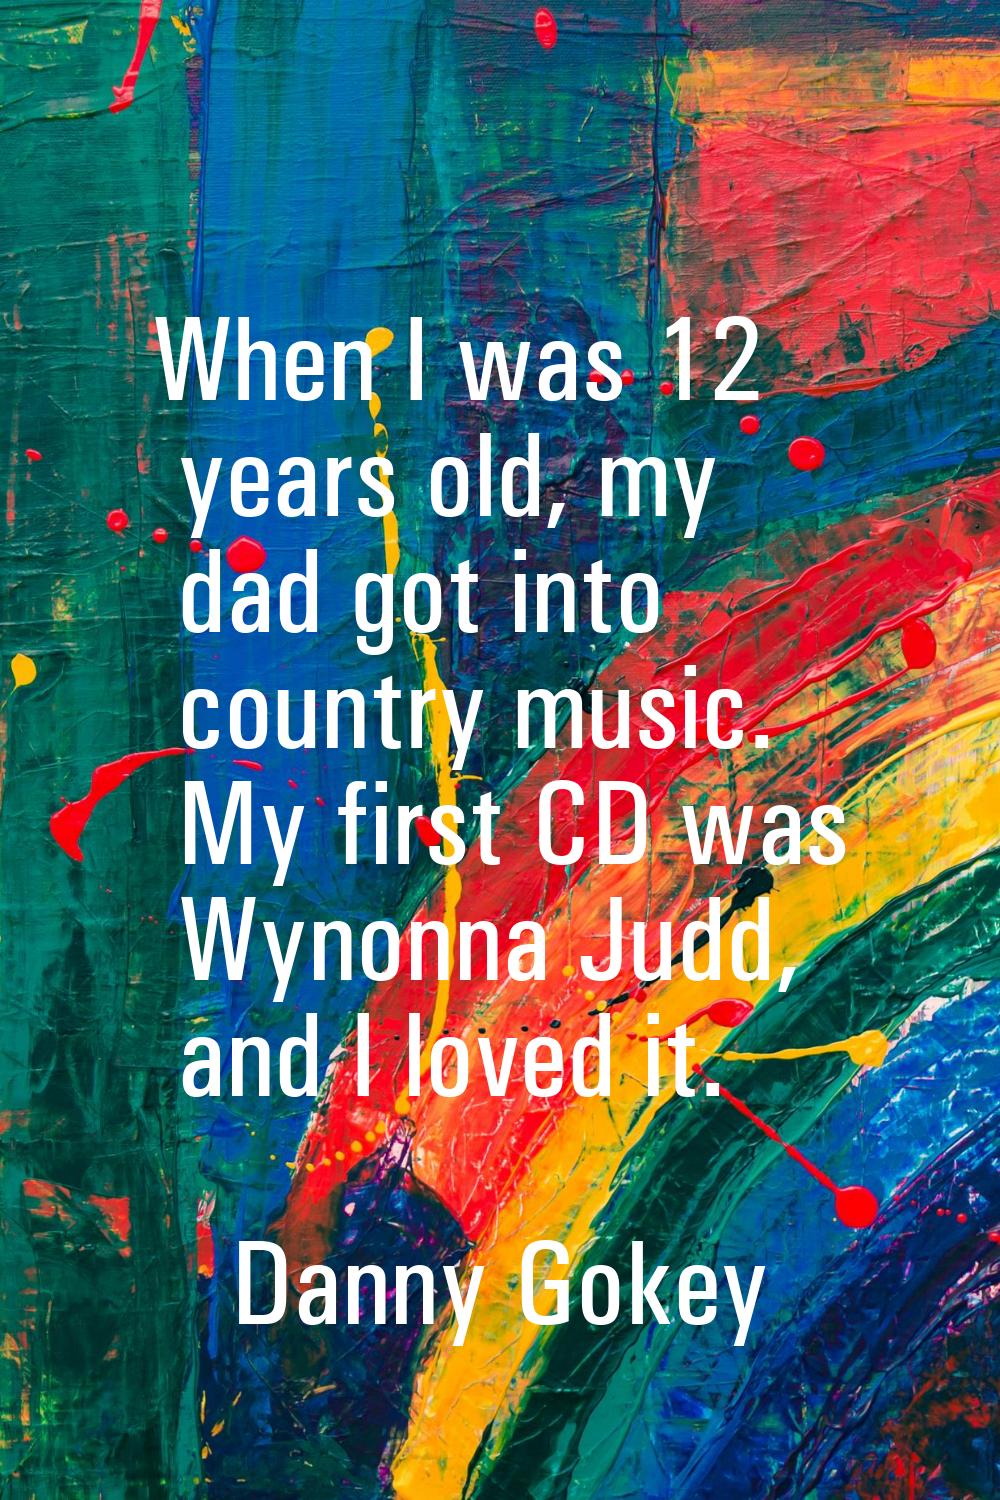 When I was 12 years old, my dad got into country music. My first CD was Wynonna Judd, and I loved i